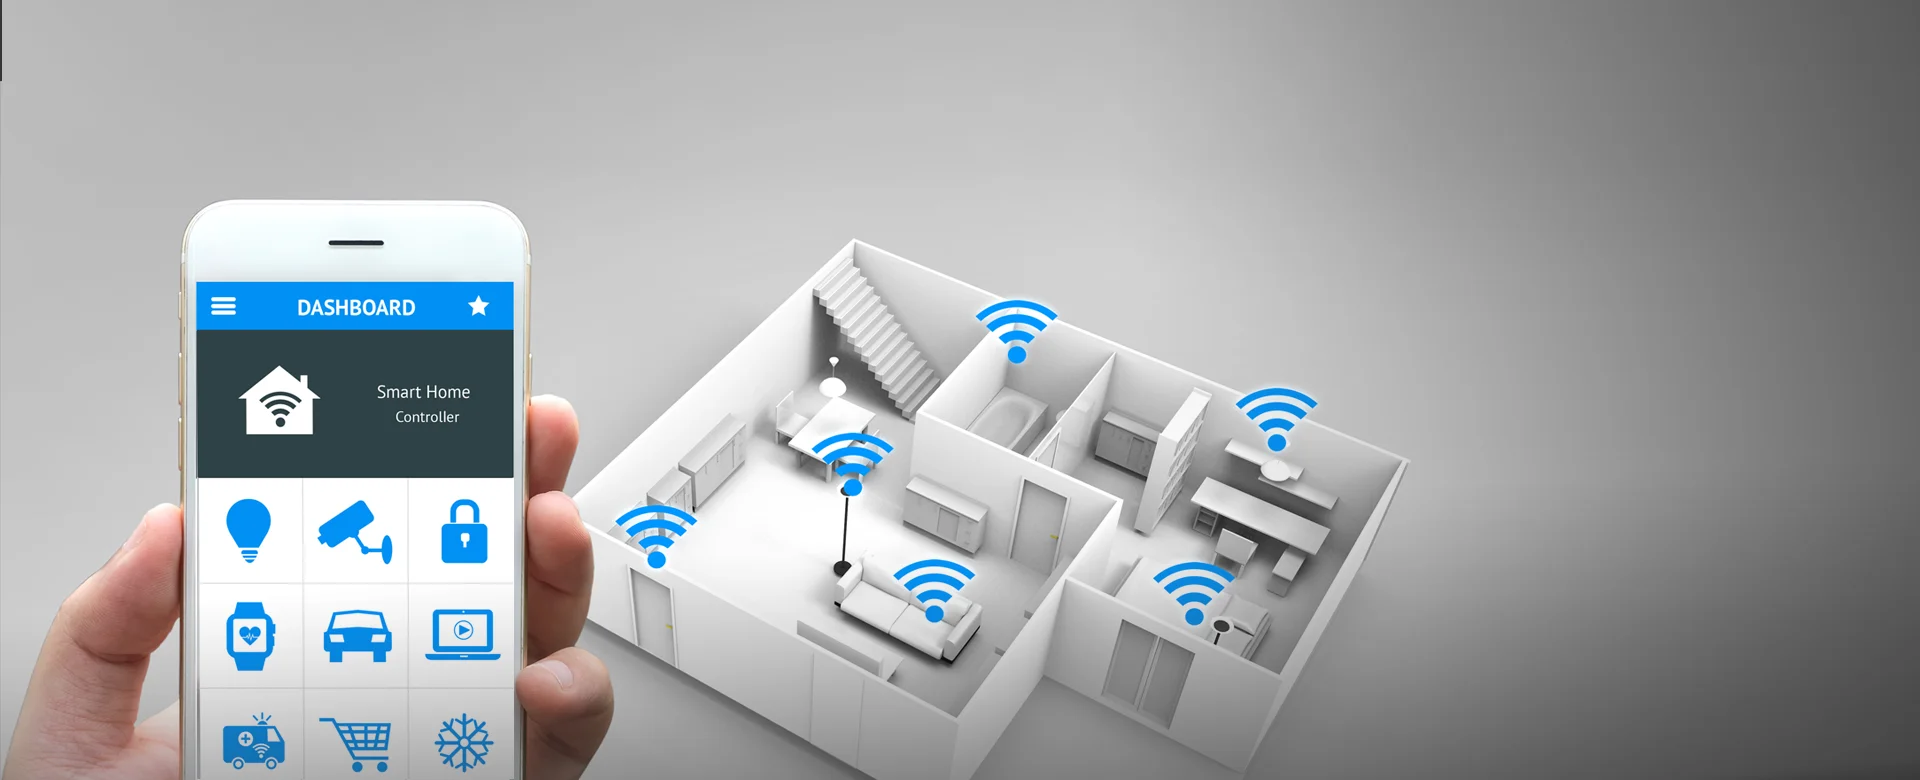 Wi-Fi and Networking - Banner